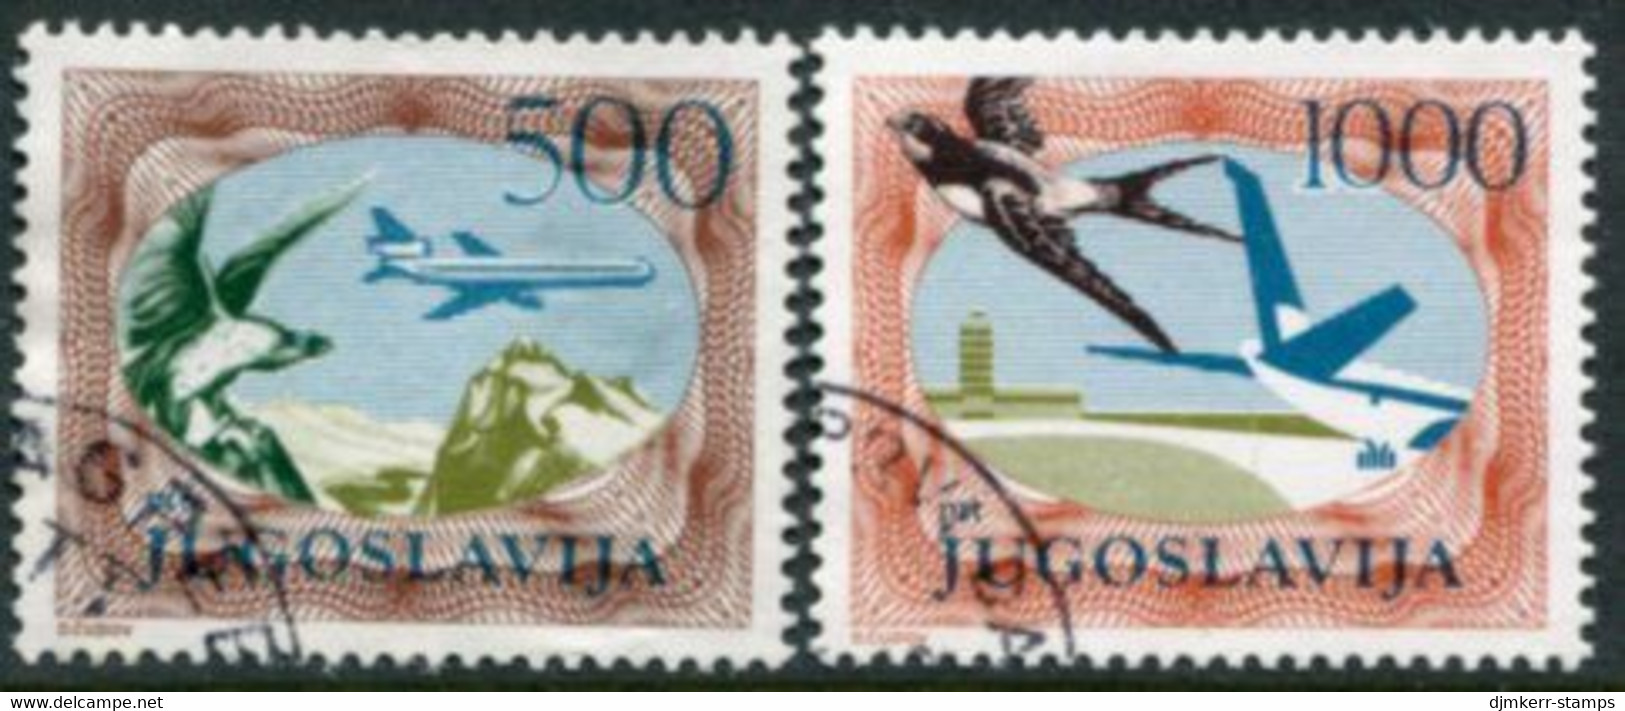 YUGOSLAVIA 1985 Airmail Definitive Perforated 12½ Used.  Michel 2098-99A - Oblitérés